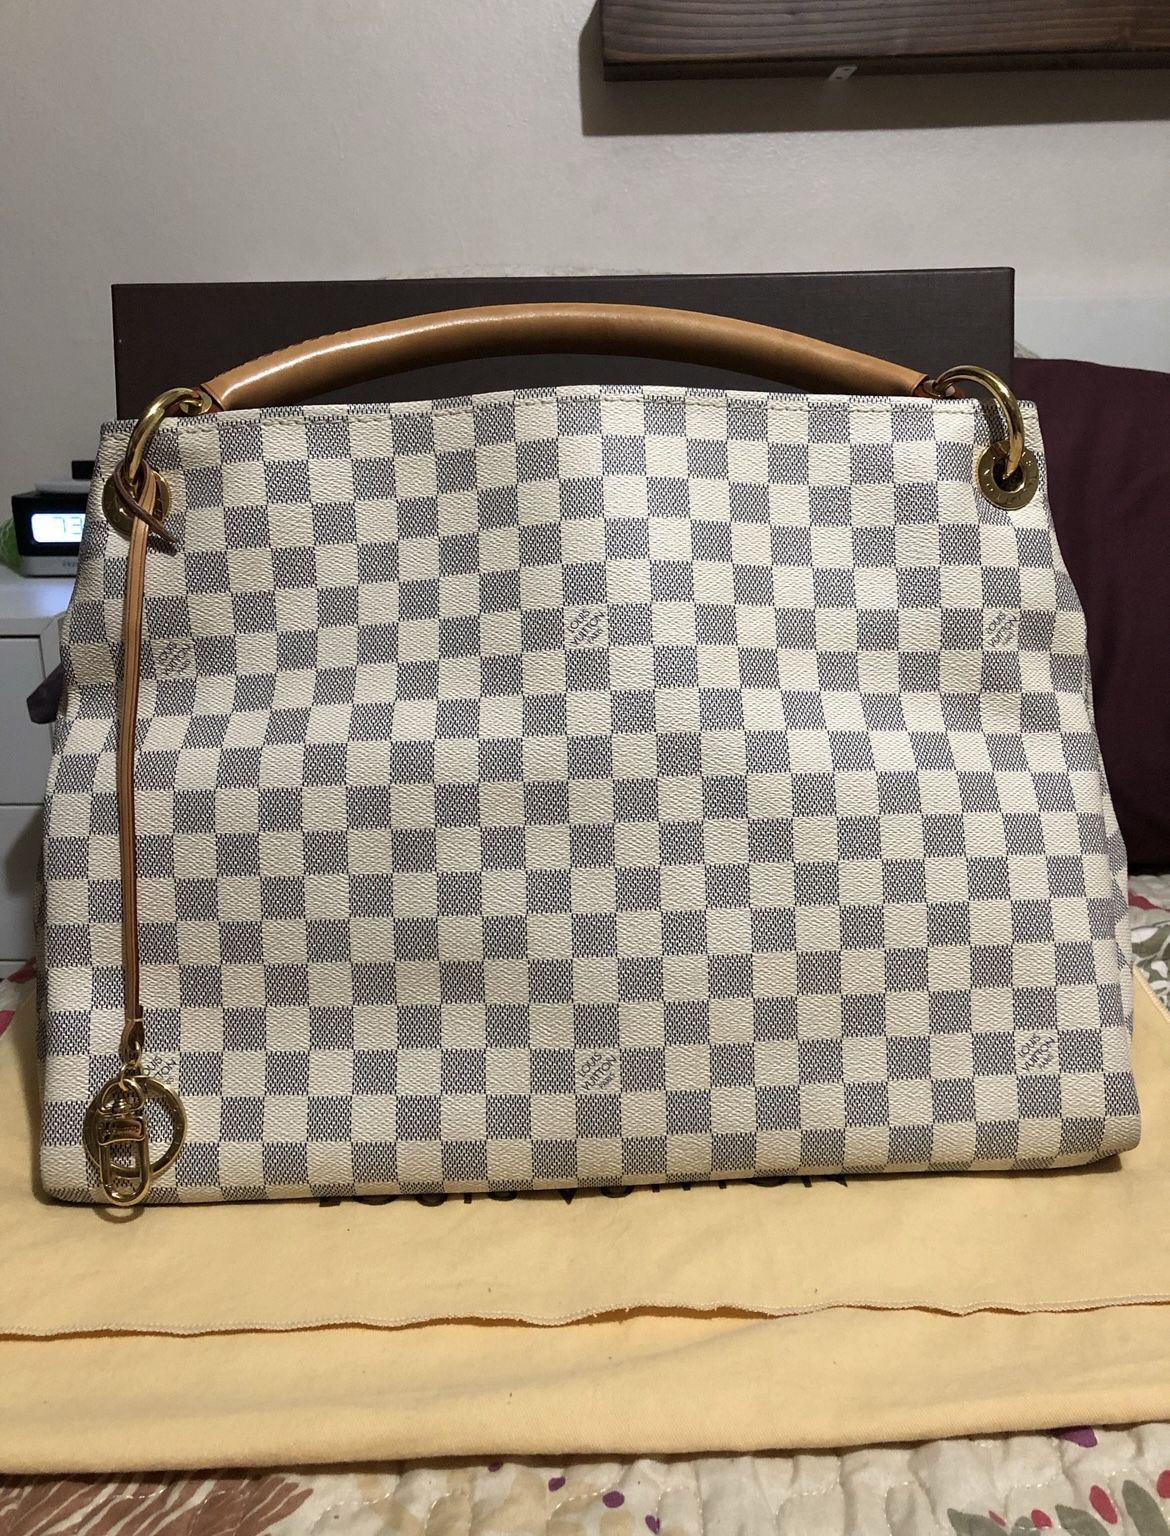 Best Place To Find Used Louis Vuitton Bags (Cheapest I've Found)